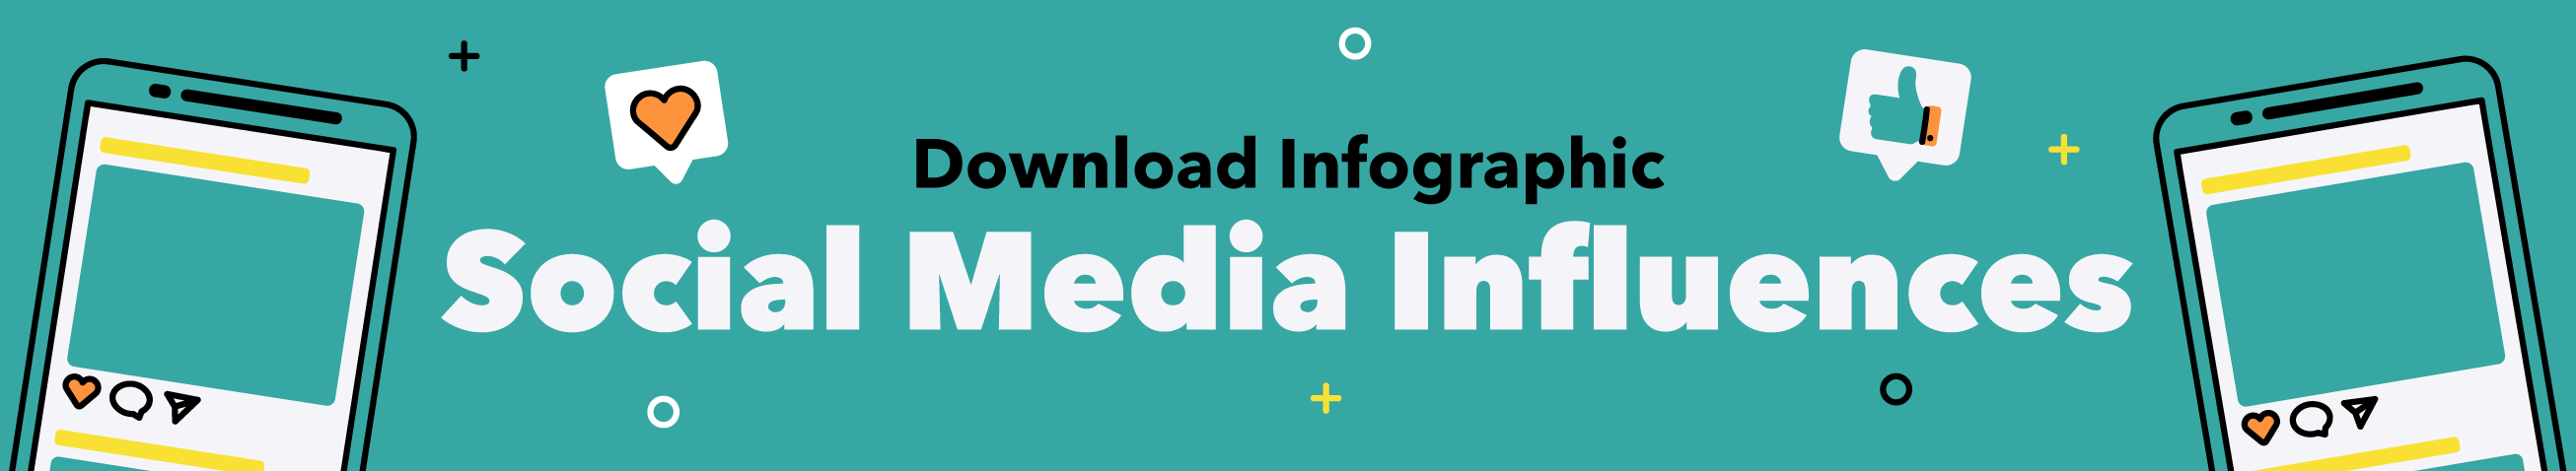 View the Social Media Influences infographic